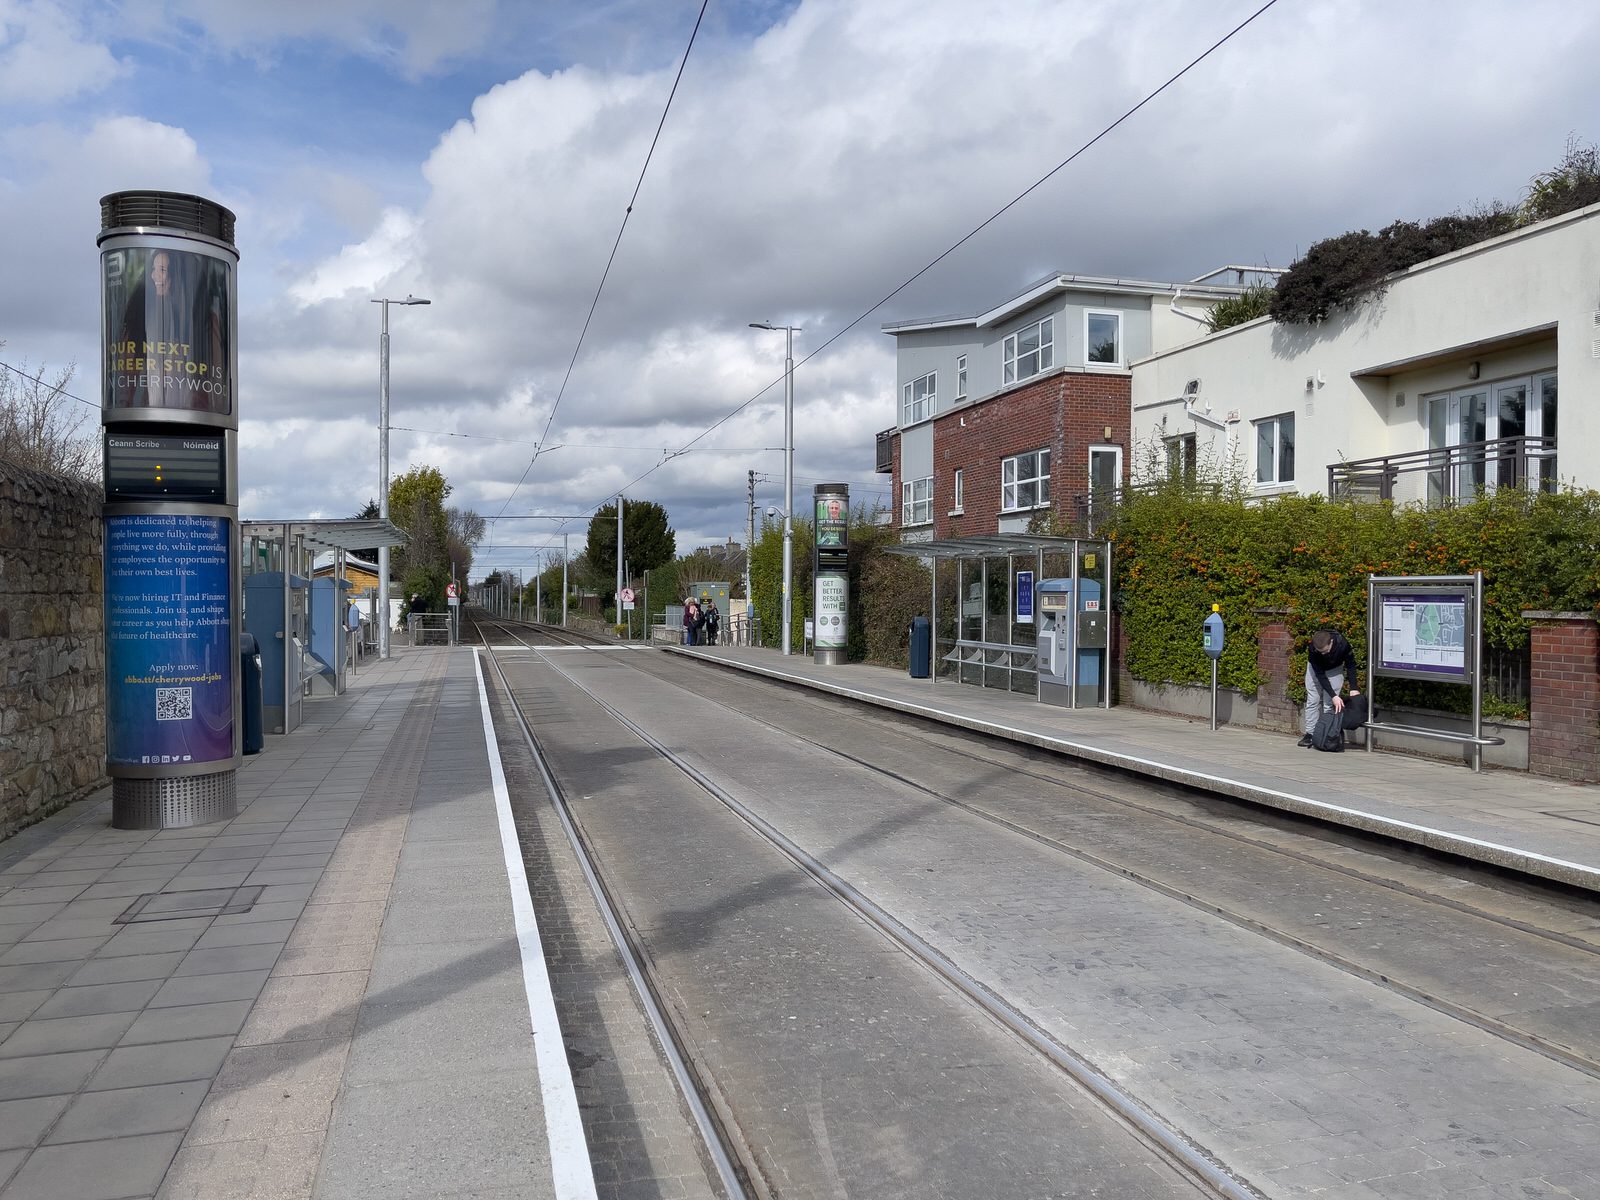 THE LUAS TRAM STOP AT WINDY ARBOUR AND THE IMMEDIATE AREA 034